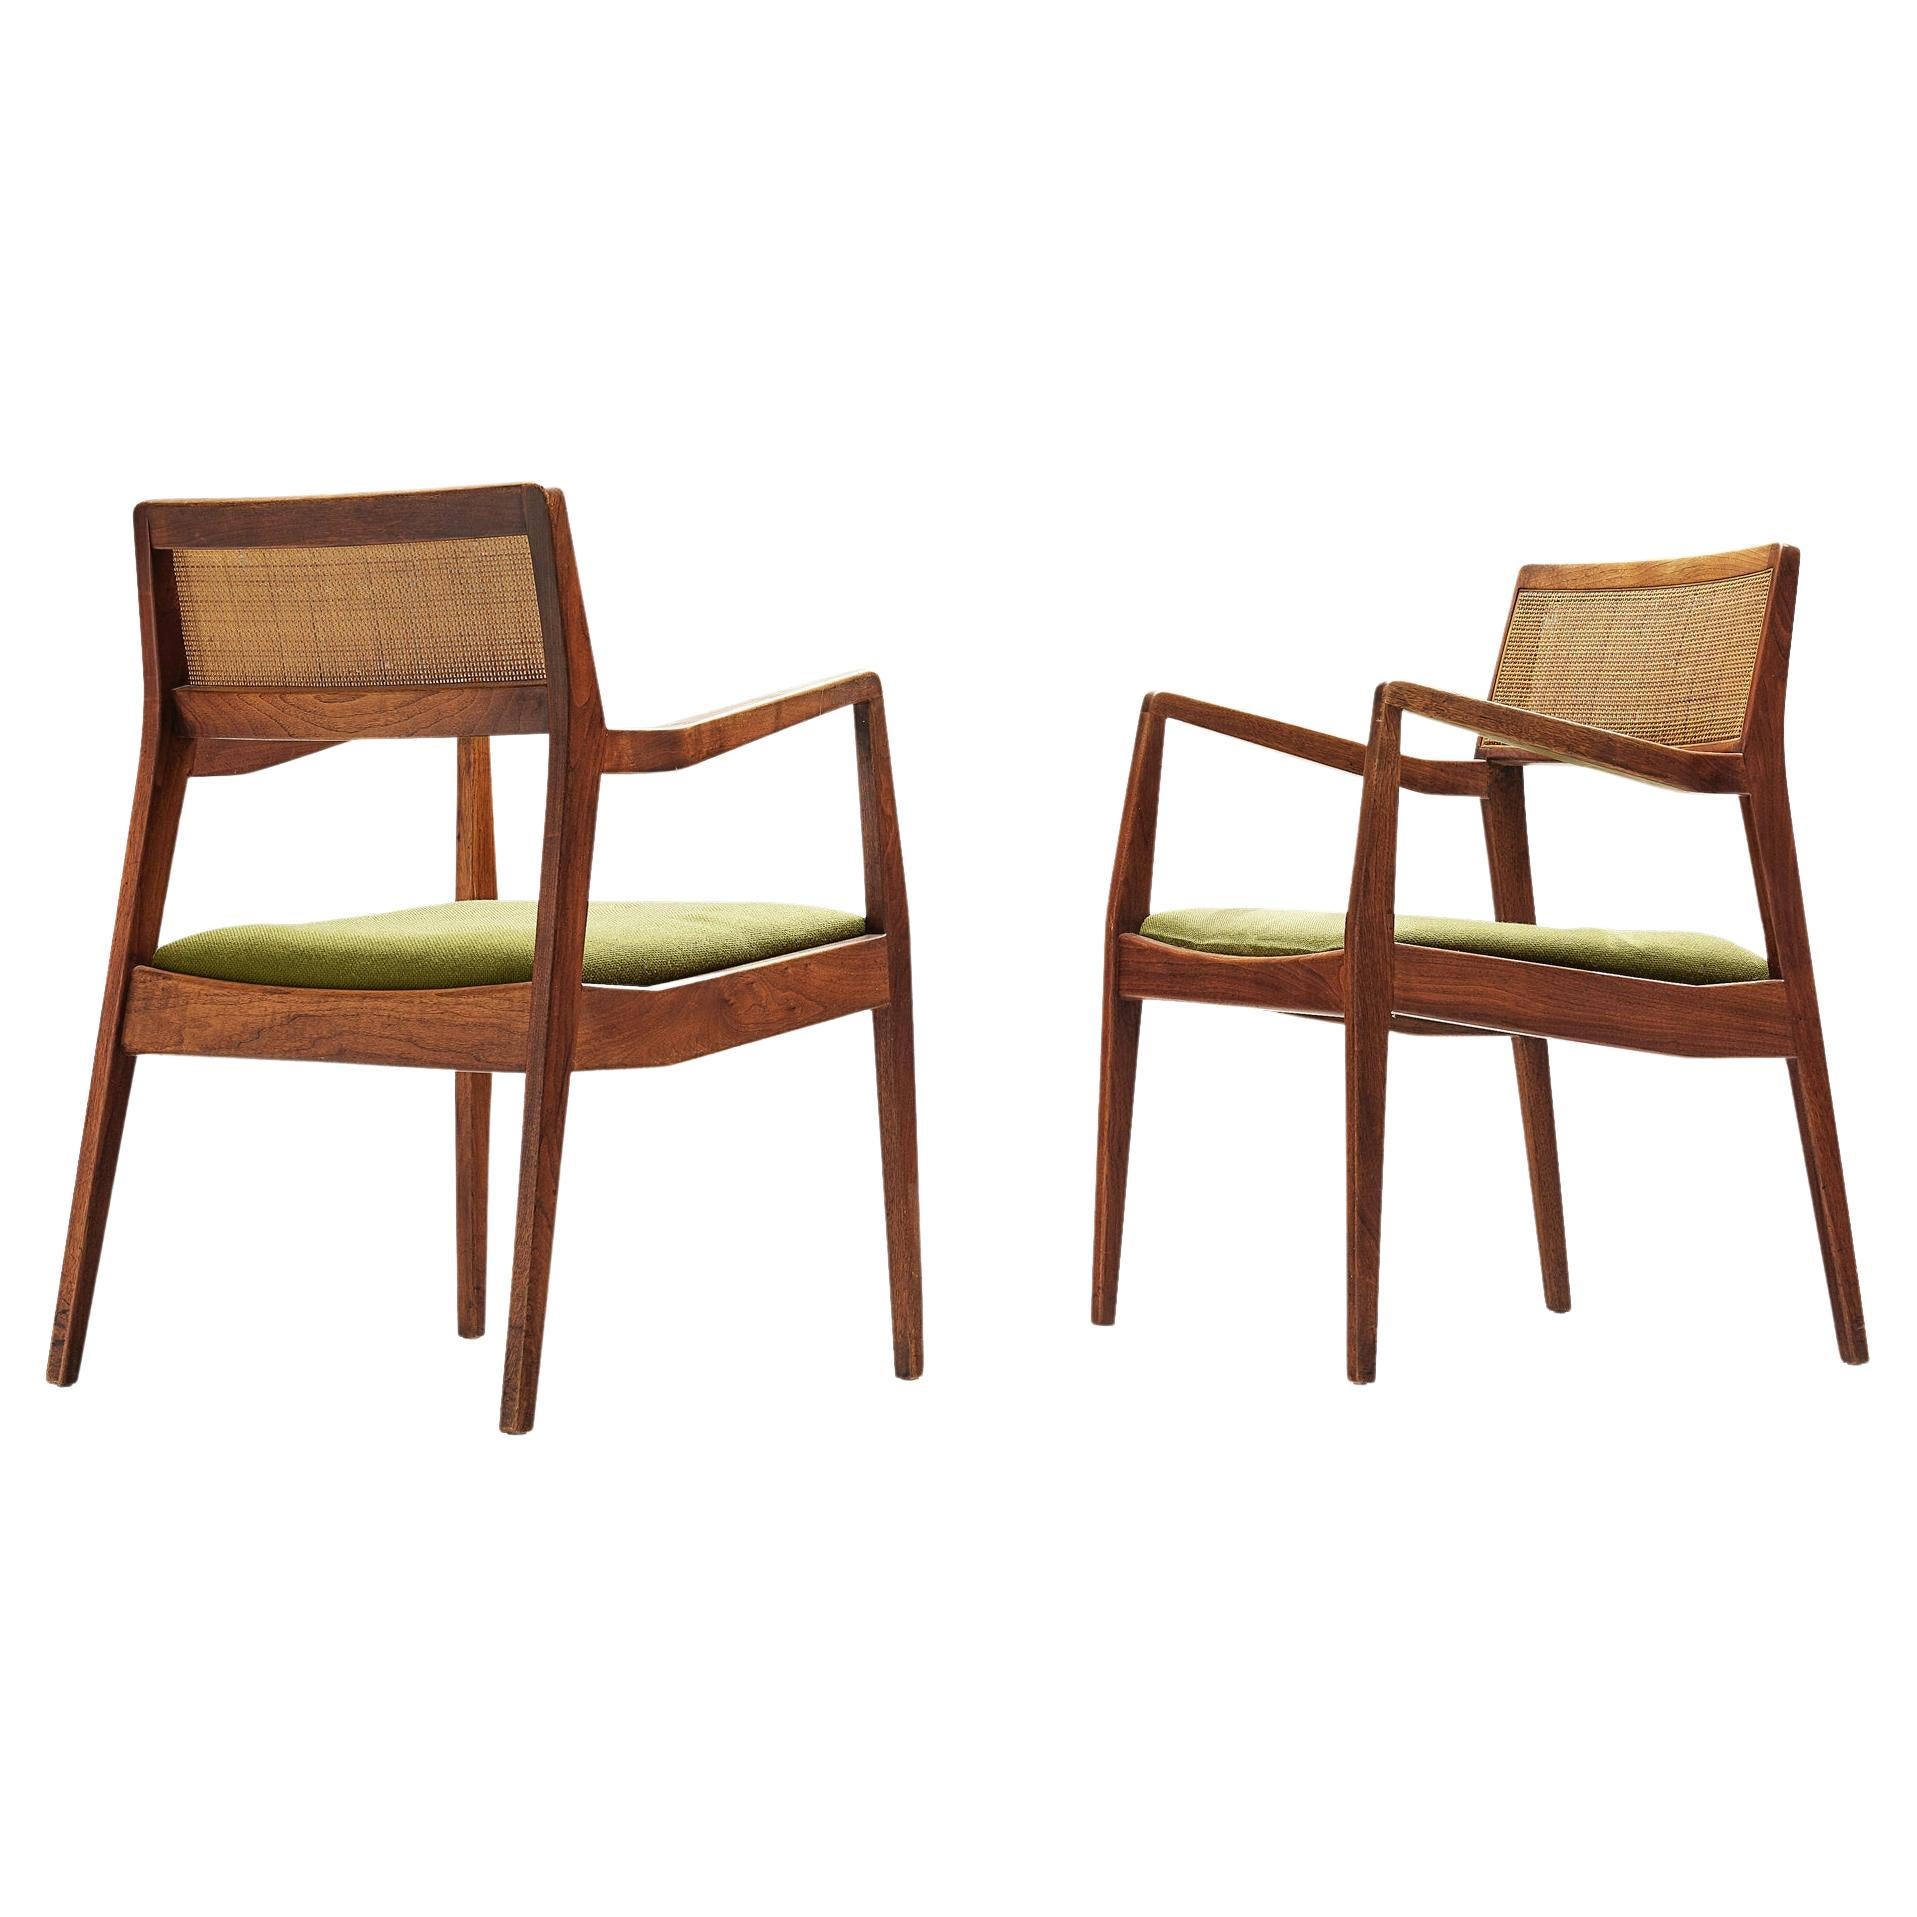 Jens Risom Pair of 'Playboy' Dining Chairs in Teak and Green Upholstery